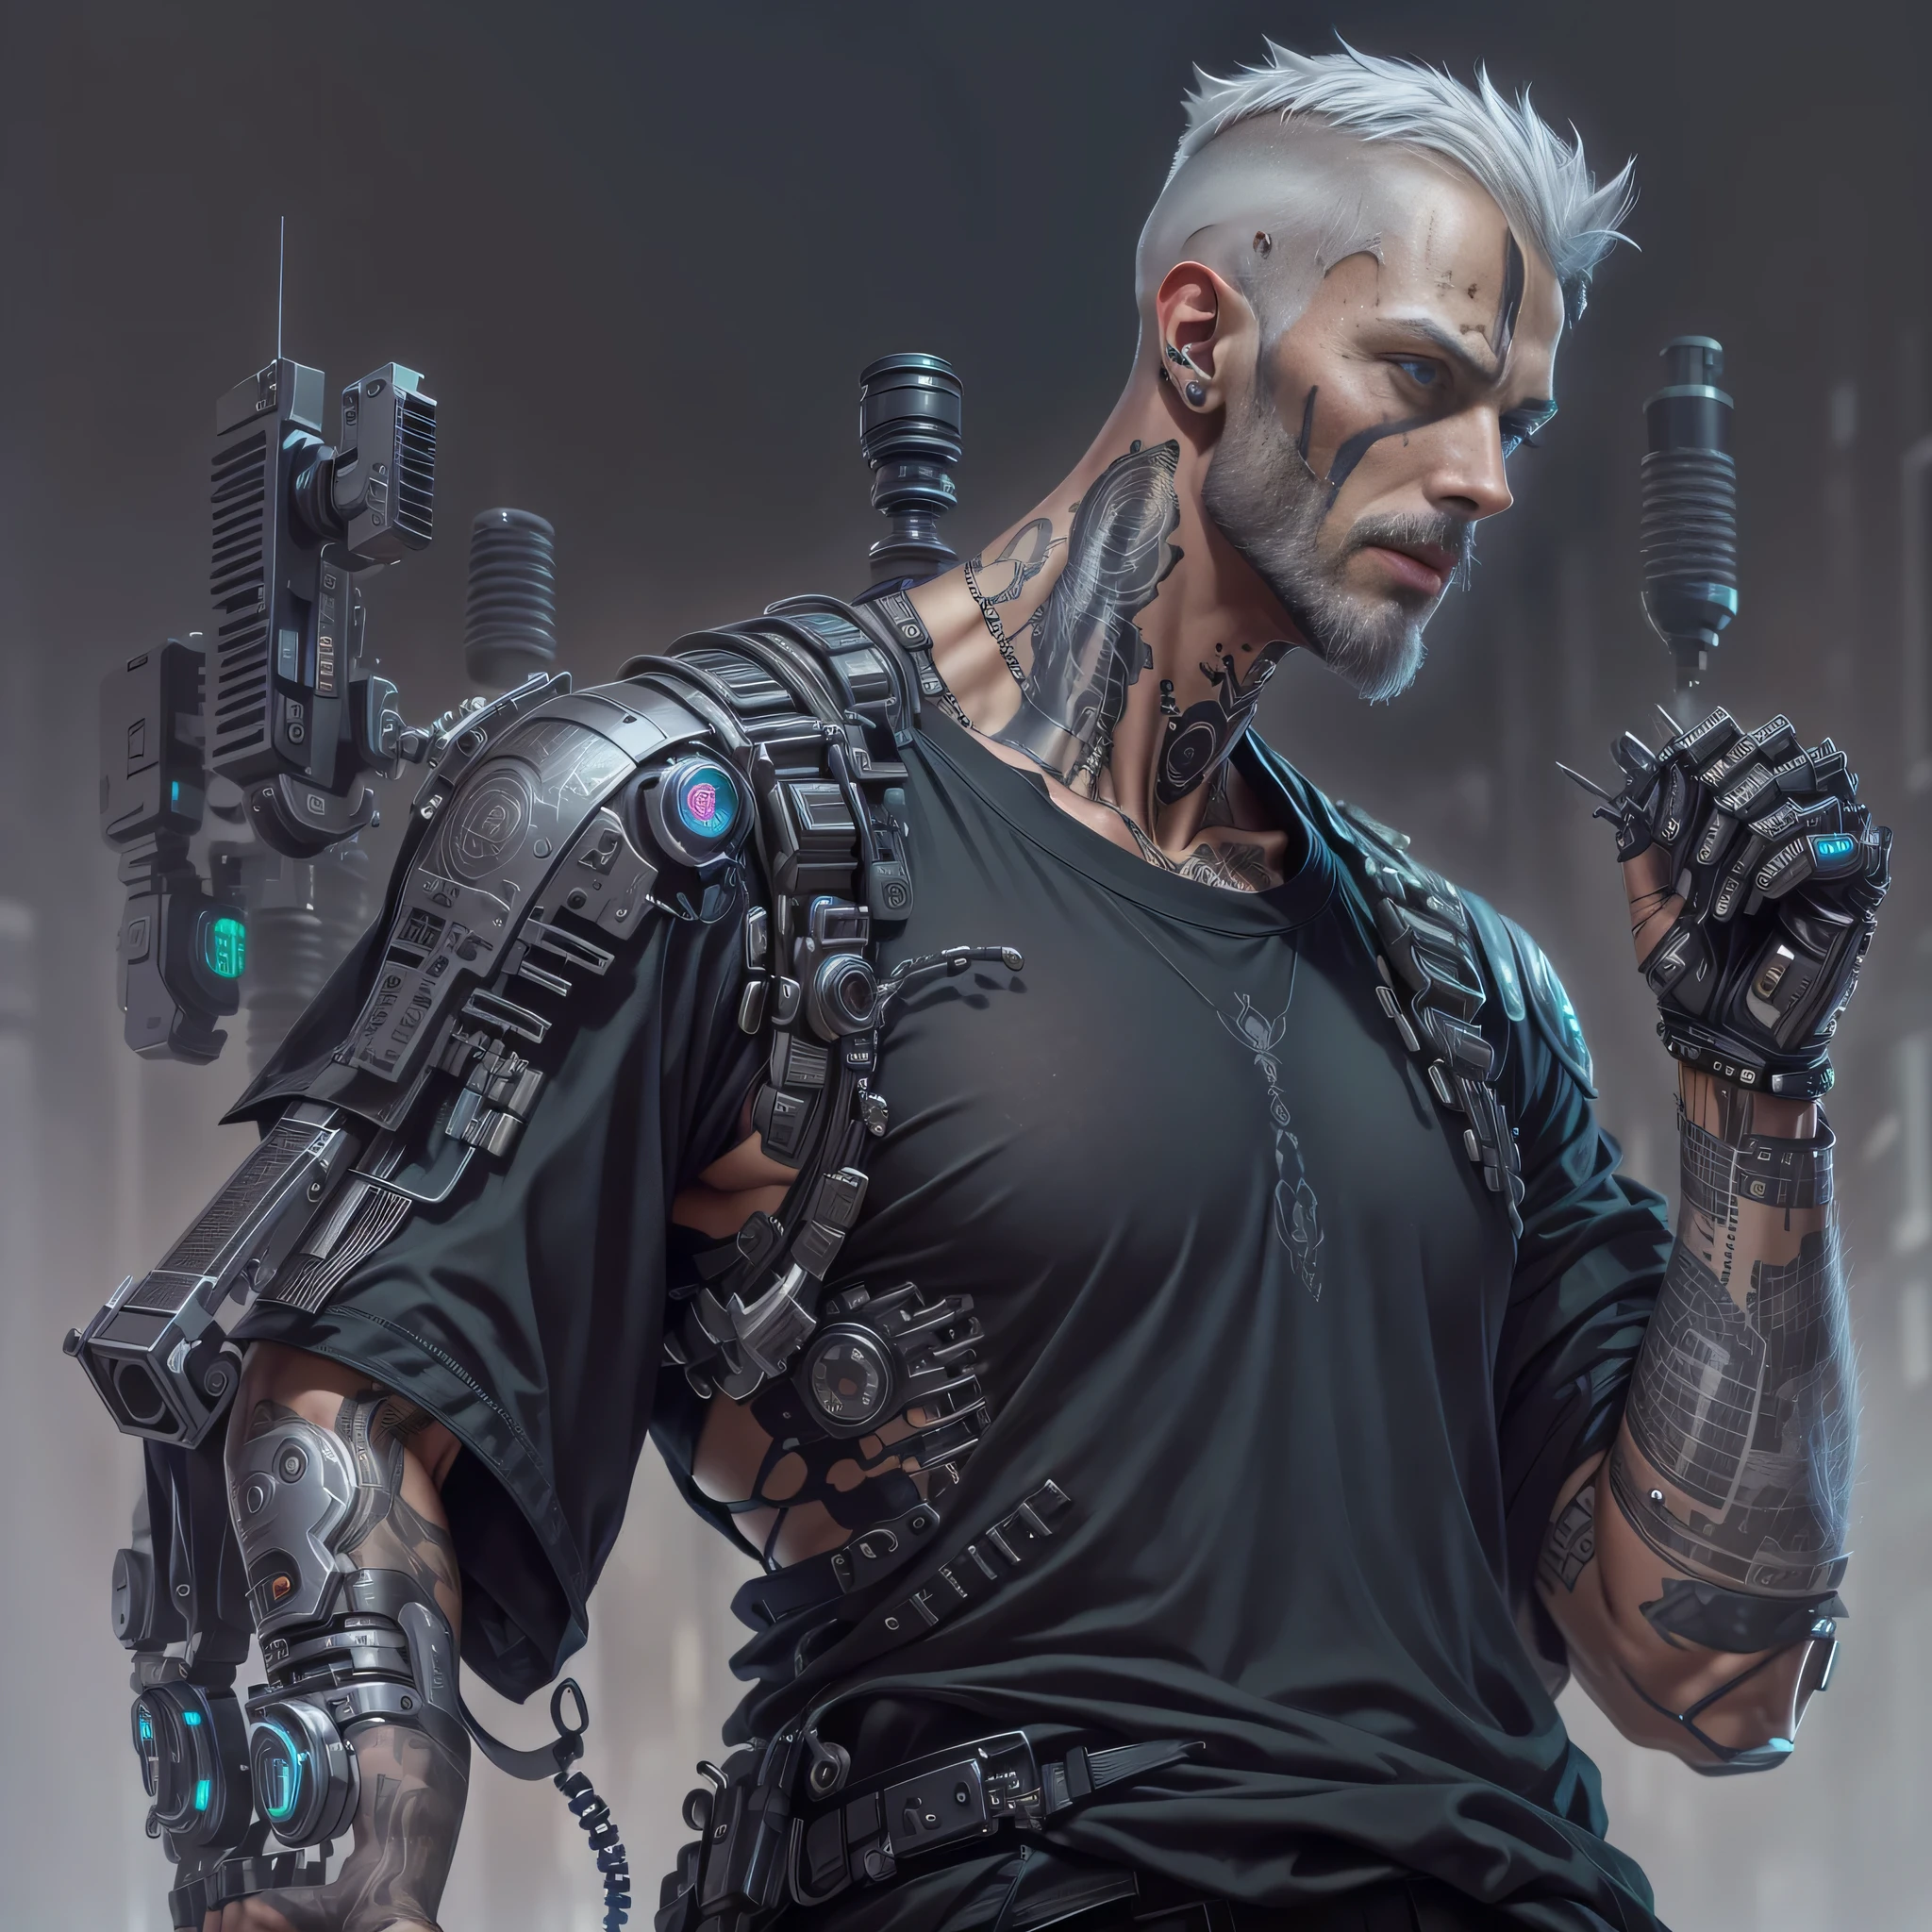 thin man, serious face, male,gray hair, barba curta, with cybernetic arm, robotic arm, with robotic prosthesis,implants on face,wearing comfortable clothes, jeans cinza, camisa regata cinza, t-shirt, shirt, tattoo on upper arm,with all hair shaved, very short hair, full body, cyberpunk, dark cyberpunk, futuristic.